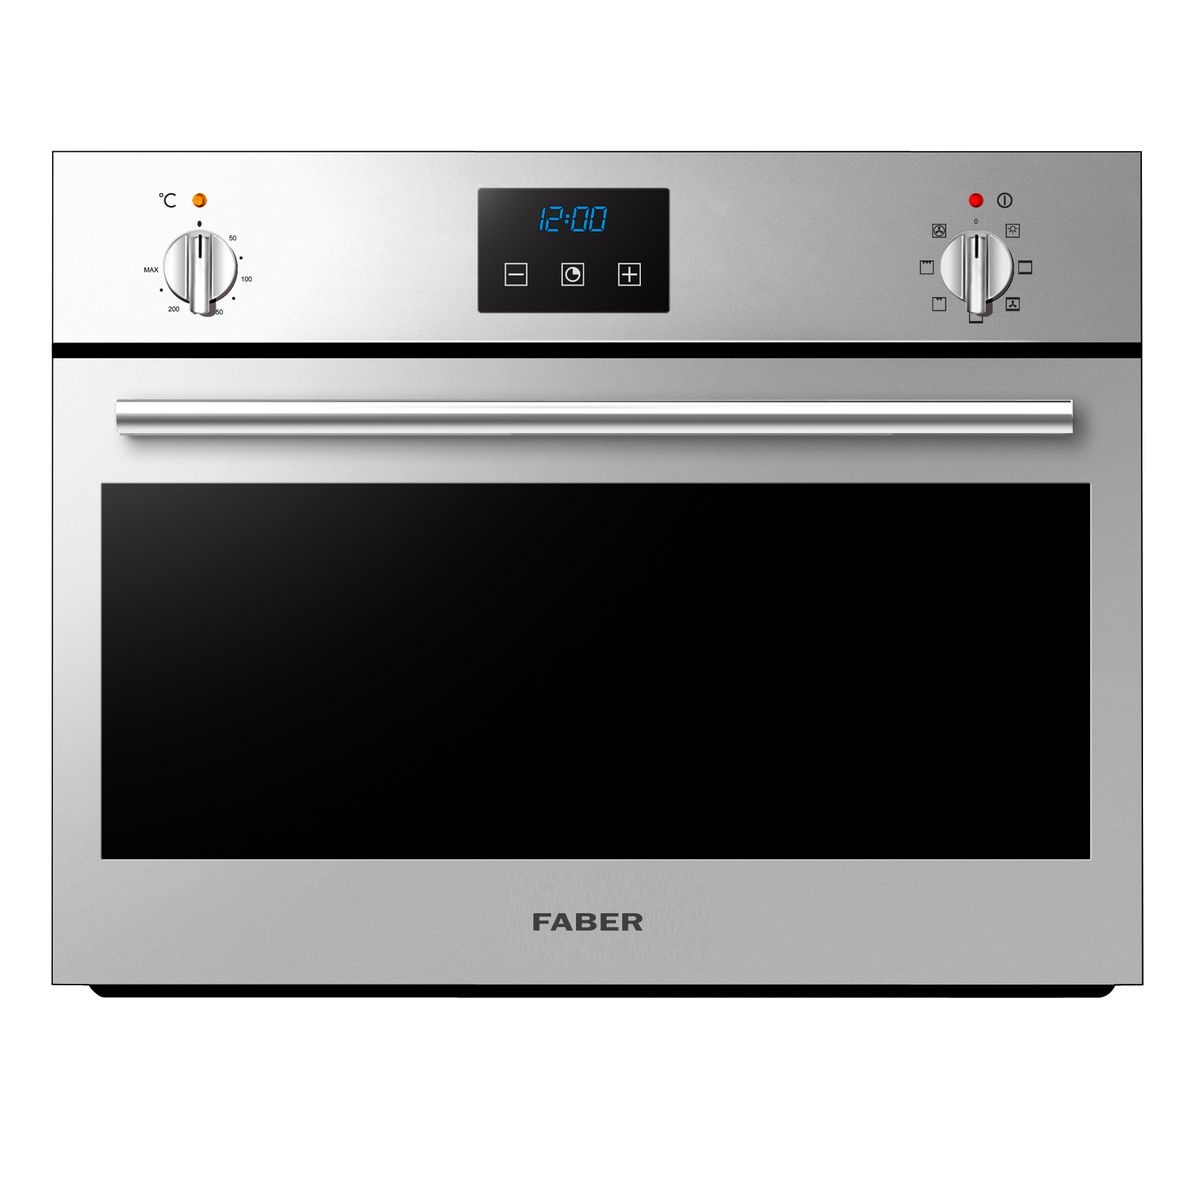 Faber - 75cm Multifunctional Electric Oven